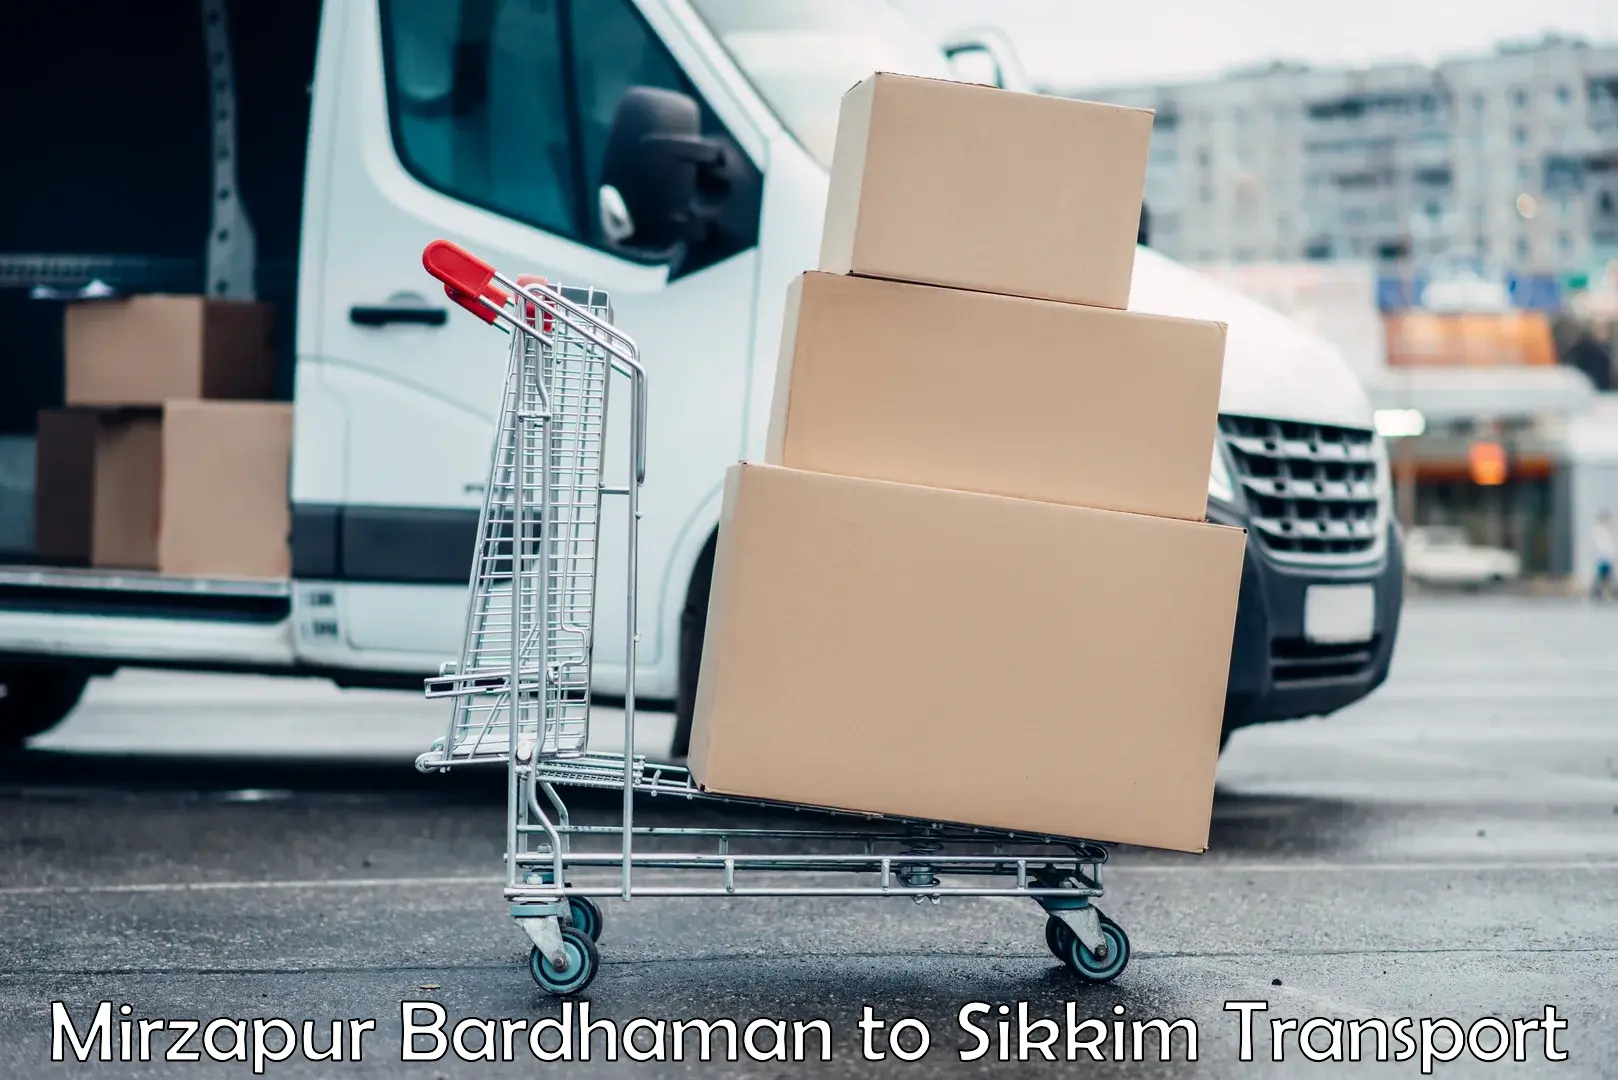 Goods delivery service Mirzapur Bardhaman to Sikkim